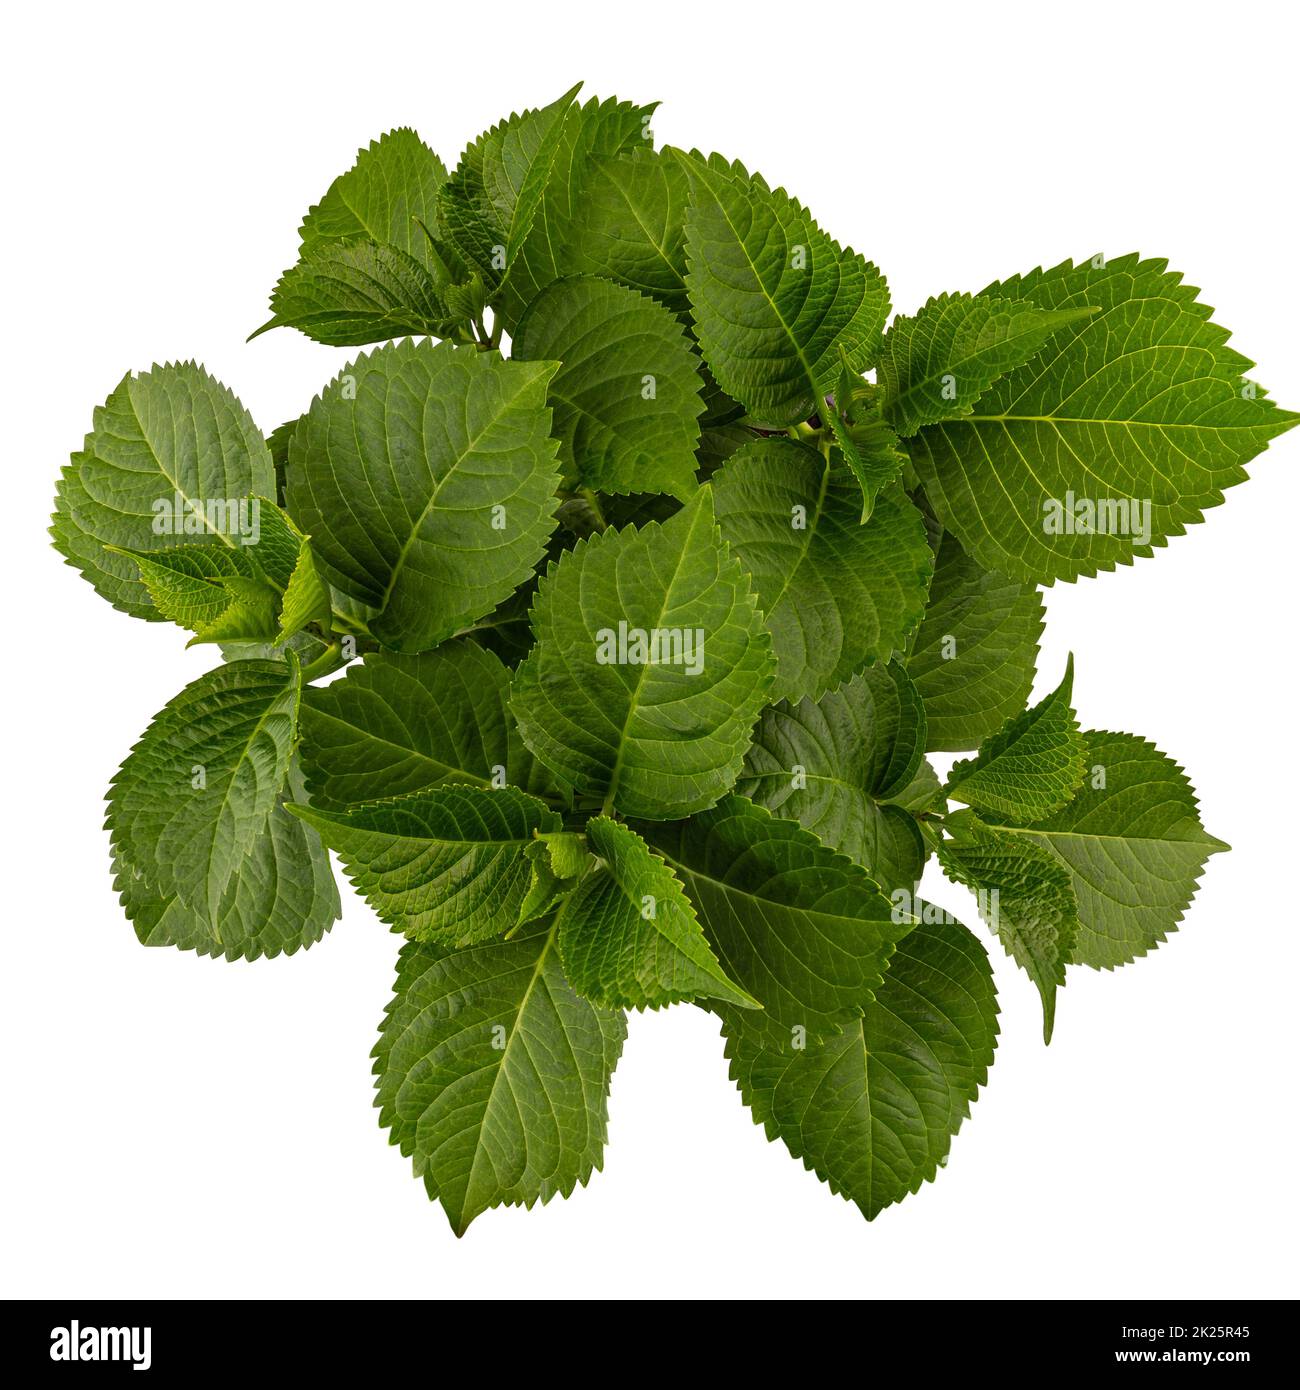 Flat lay of dahlia flower leaves Stock Photo